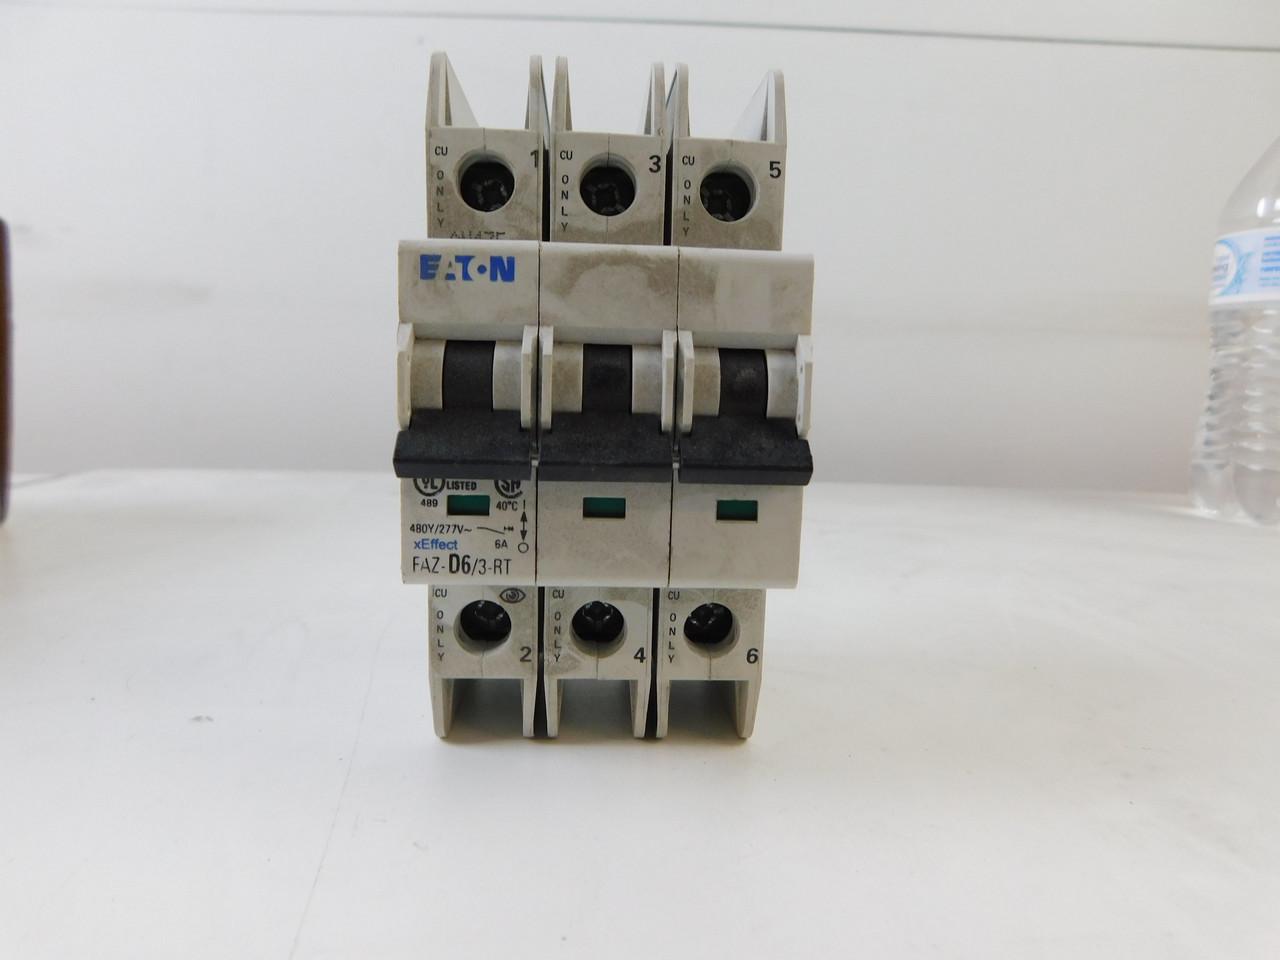 Eaton FAZ-D6/3-RT 277/480 VAC 50/60 Hz, 6 A, 3-Pole, 10/14 kA, 10 to 20 x Rated Current, Ring Tongue Terminal, DIN Rail Mount, Standard Packaging, D-Curve, Current Limiting, Thermal Magnetic